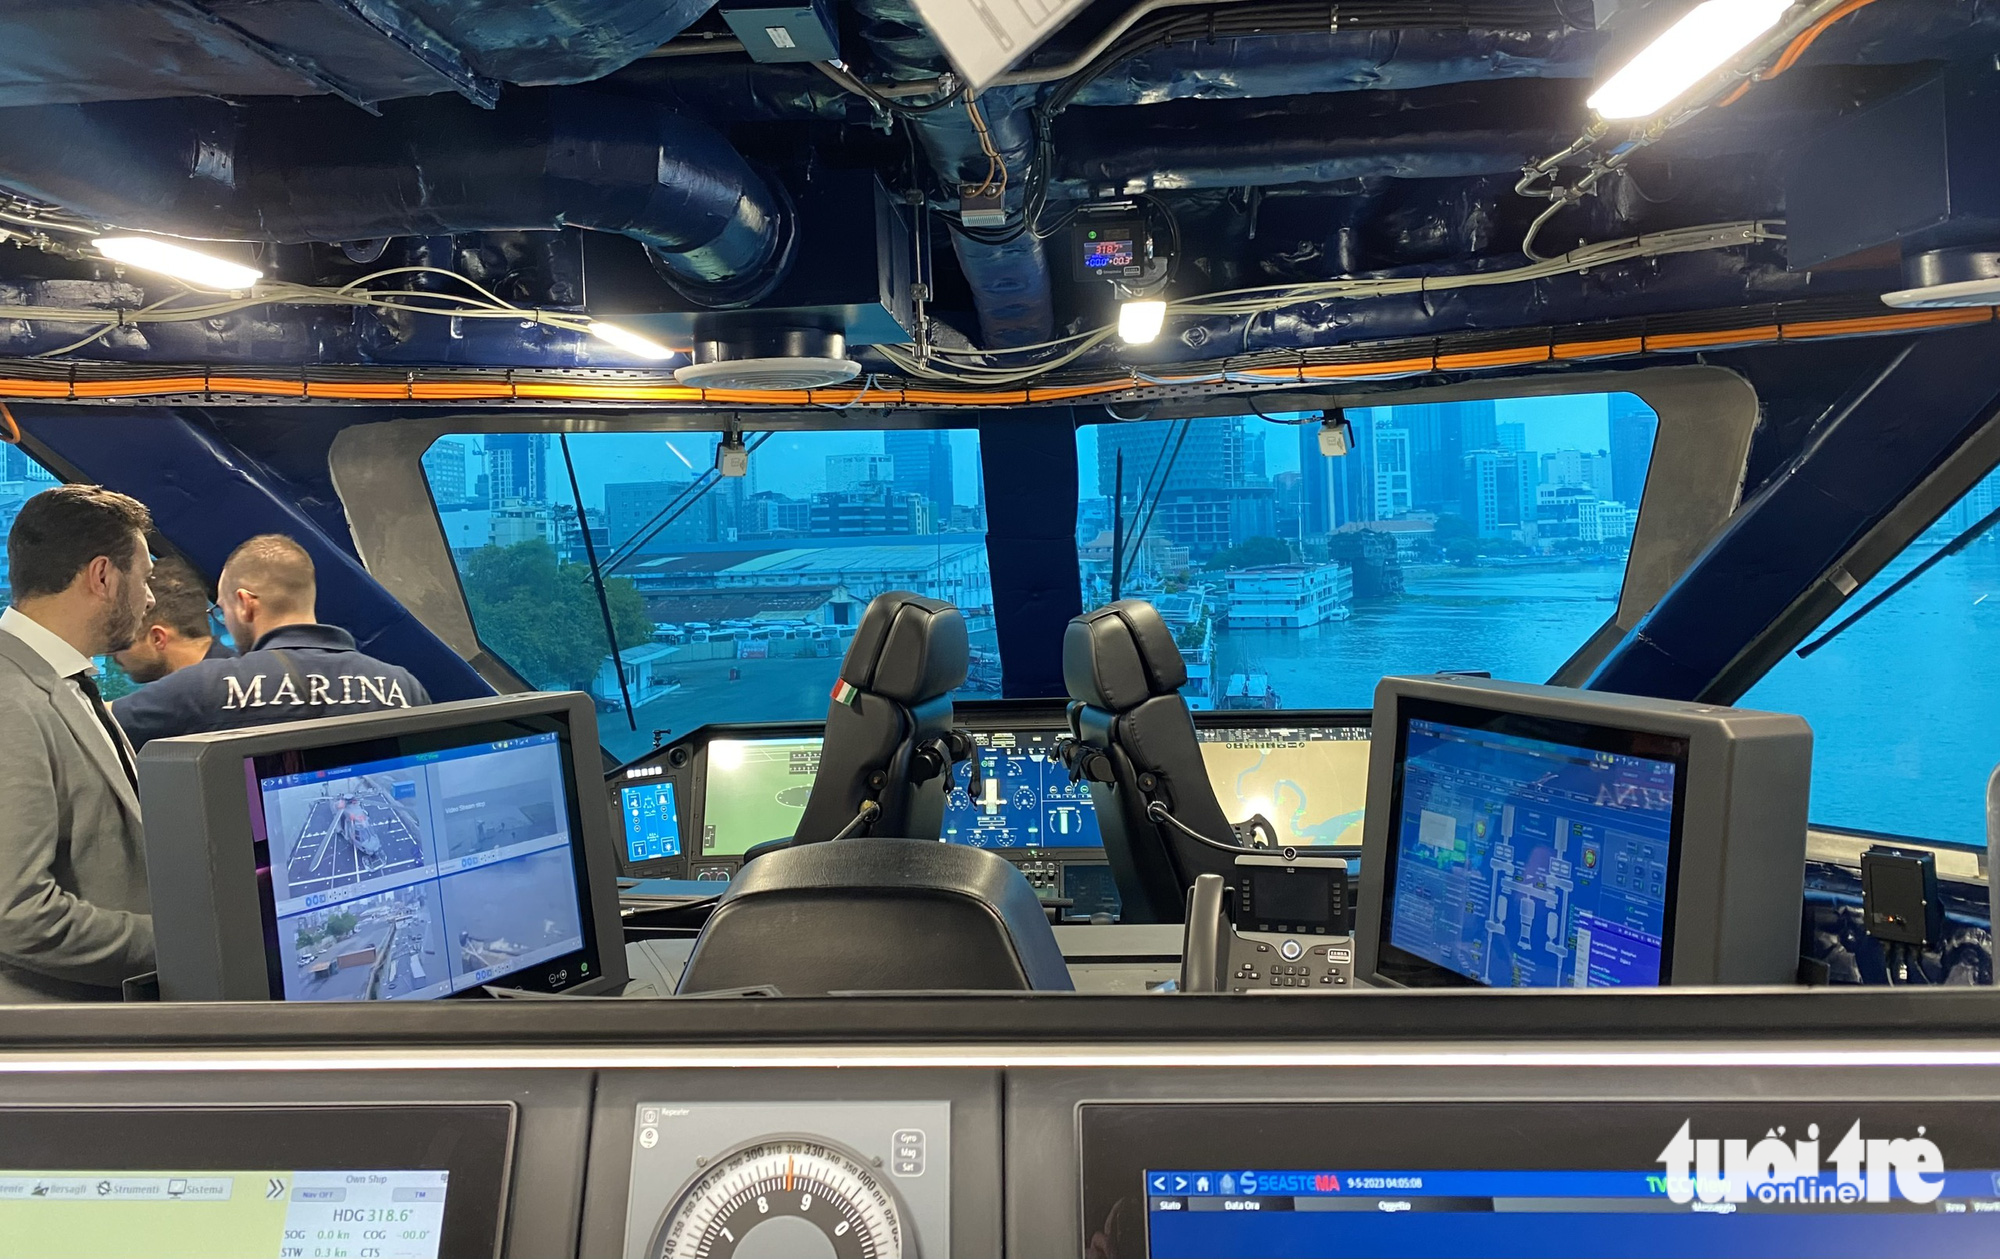 The view from the captain's seat in the naval cockpit. Photo: Tran Phuong / Tuoi Tre